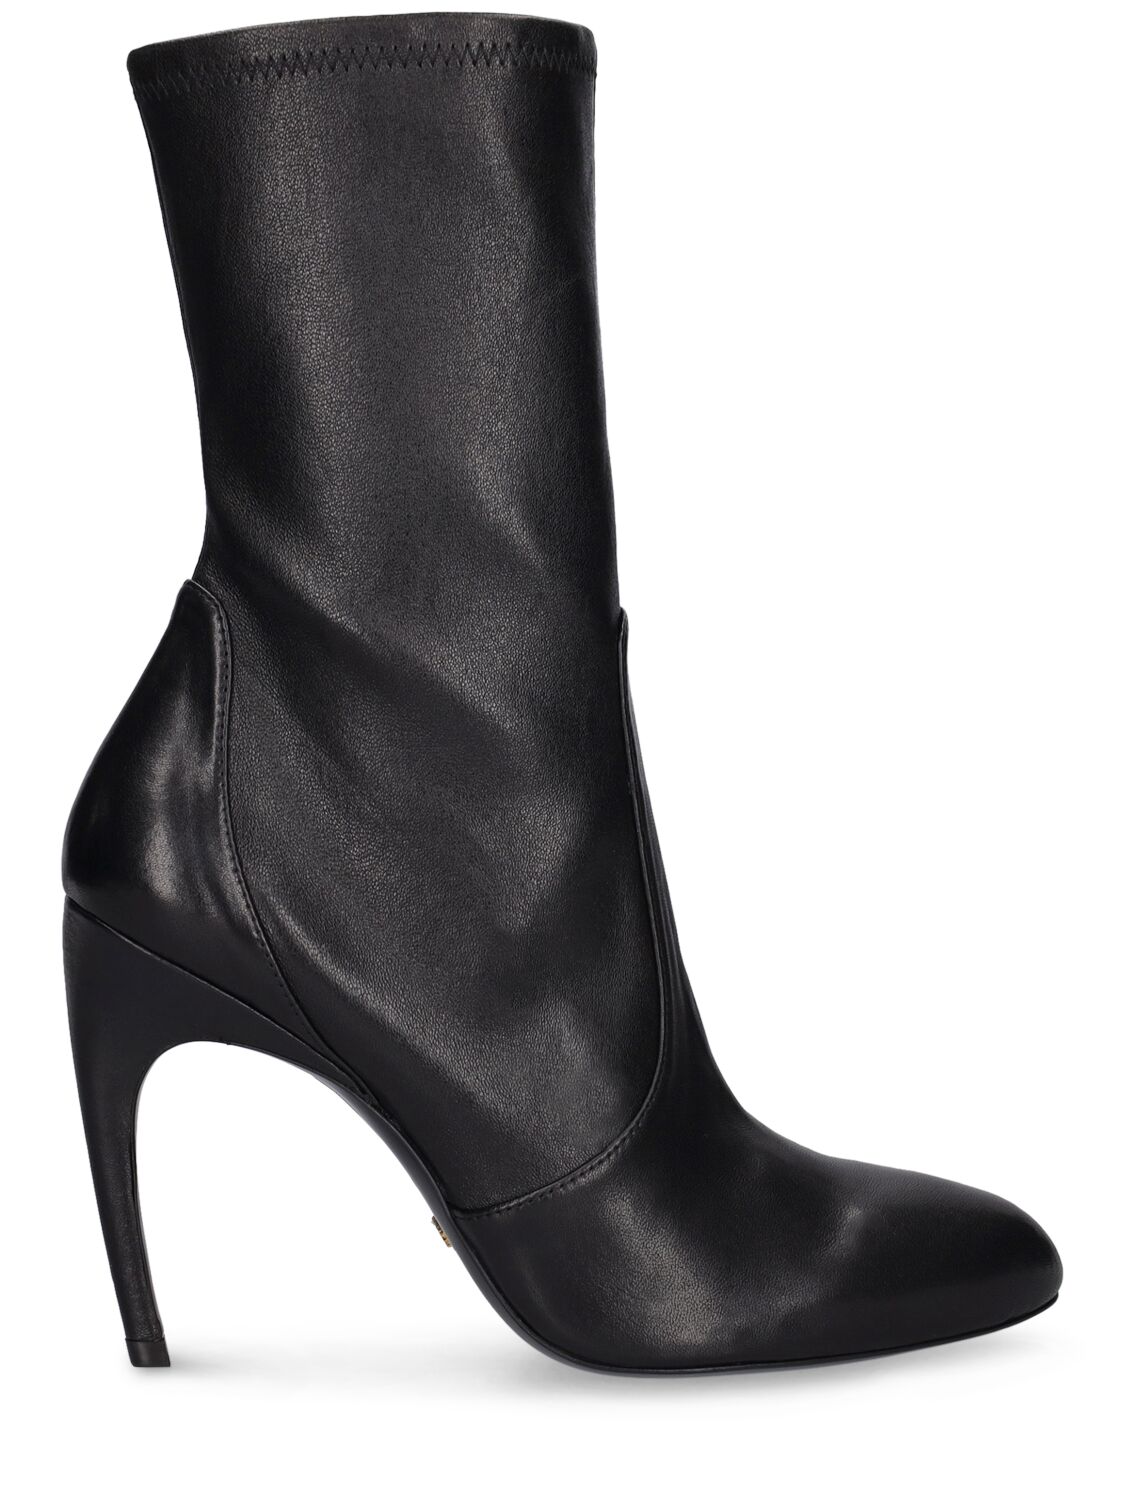 STUART WEITZMAN 100MM LUXECURVE LEATHER ANKLE BOOTS